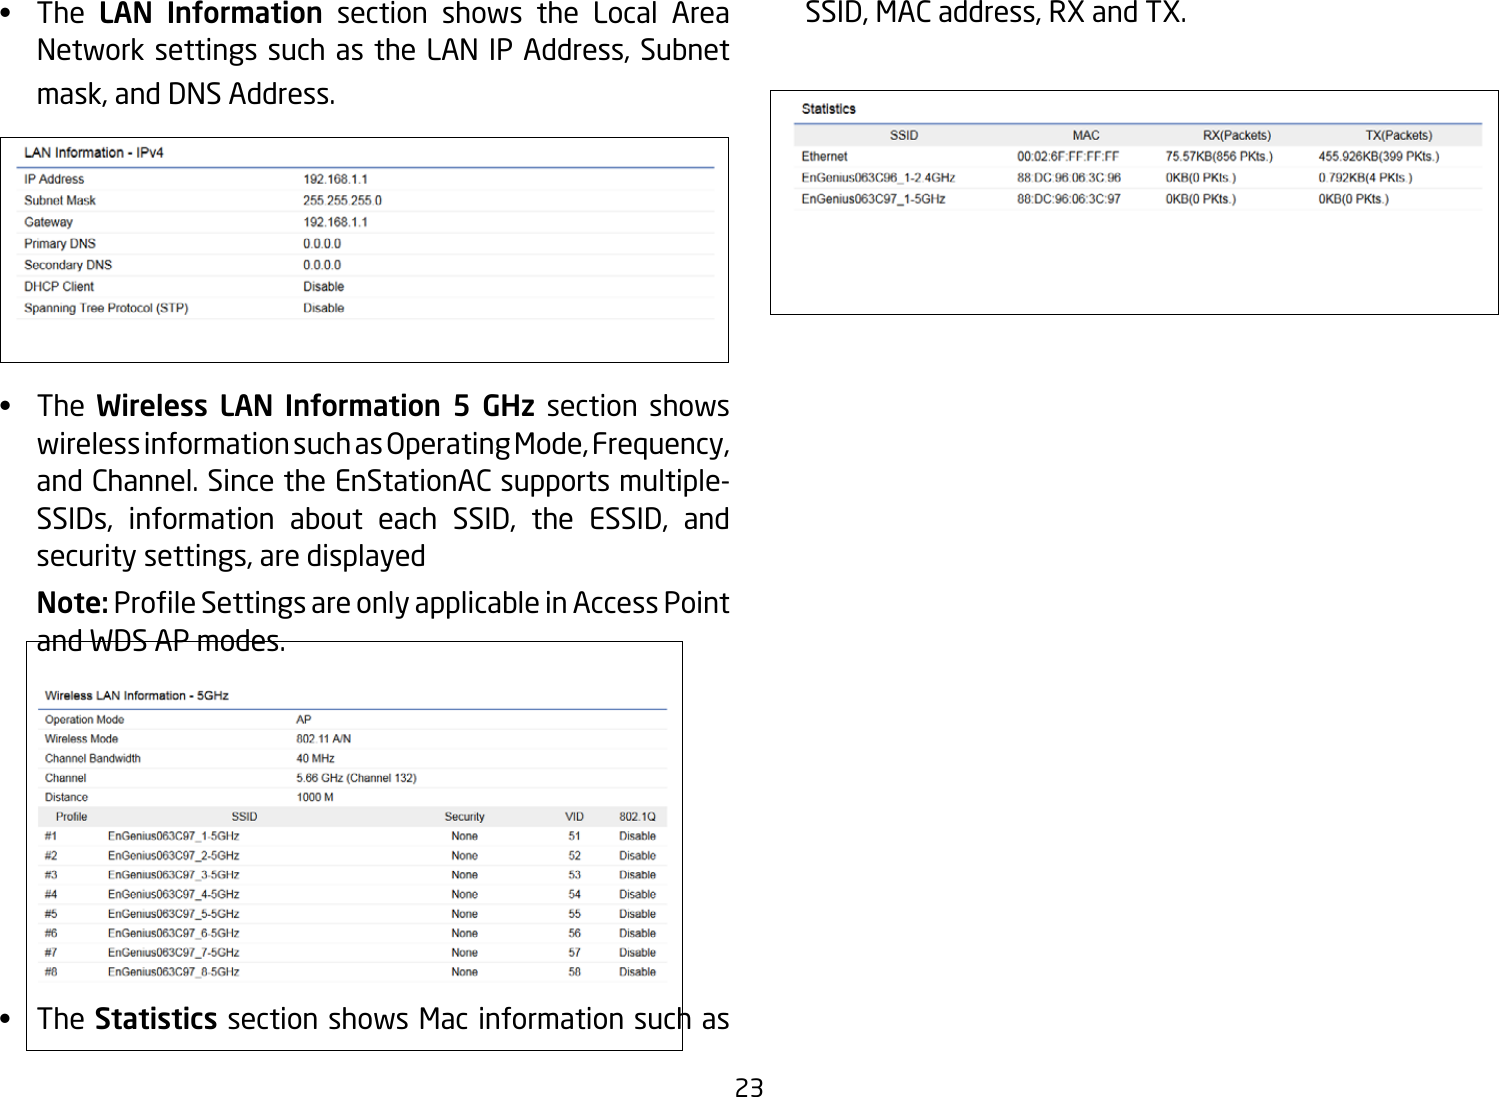 23•  The LAN Information section shows the Local Area Network settings such as the LAN IP Address, Subnet mask, and DNS Address.•  The  Wireless LAN Information 5 GHz section shows wirelessinformationsuchasOperatingMode,Frequency,and Channel. Since the EnStationAC supports multiple-SSIDs, information about each SSID, the ESSID, and security settings, are displayed Note: ProleSettingsareonlyapplicableinAccessPointand WDS AP modes.•  TheStatistics section shows Mac information such as SSID,MACaddress,RXandTX.